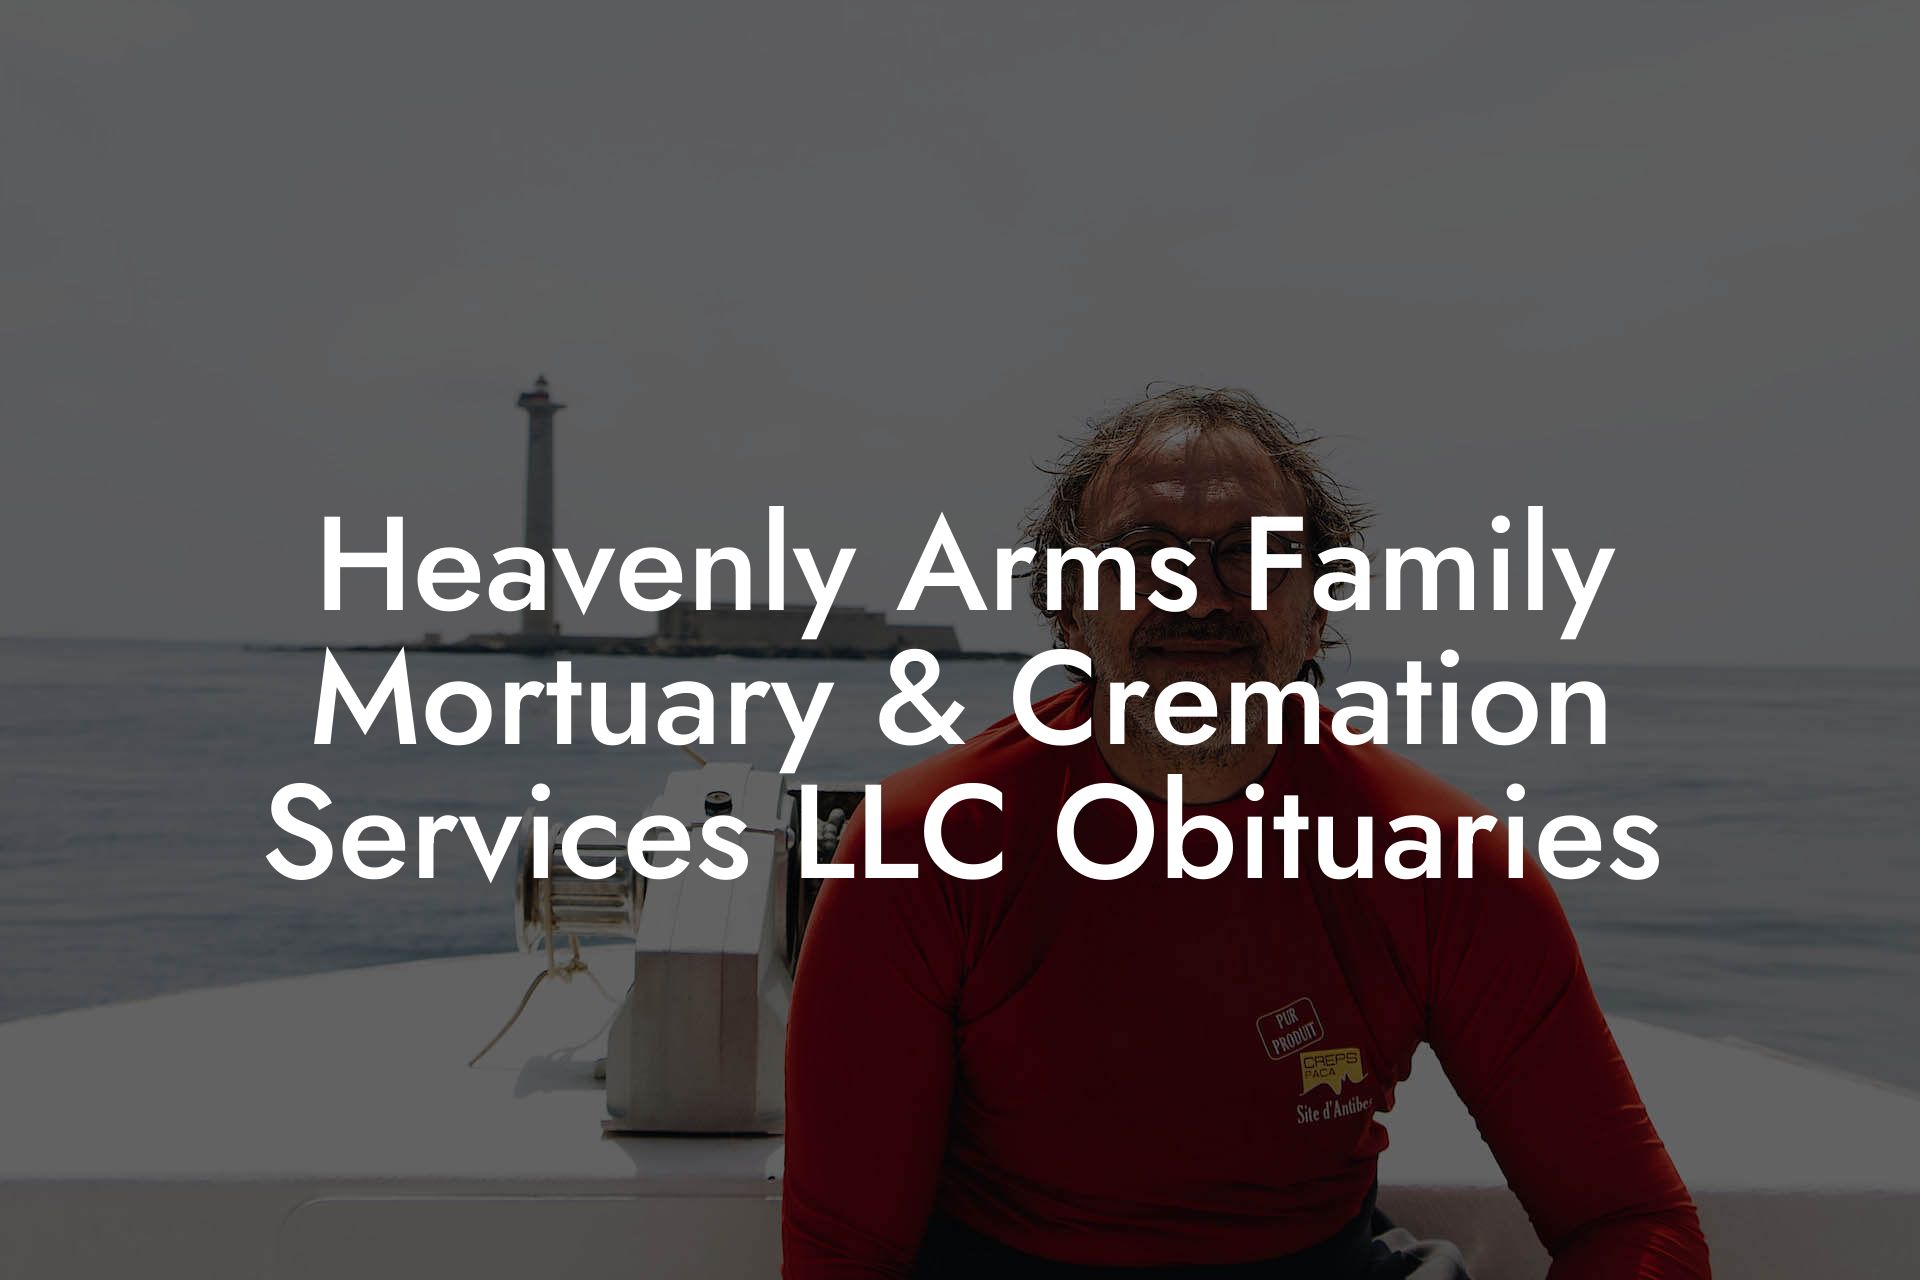 Heavenly Arms Family Mortuary & Cremation Services LLC Obituaries